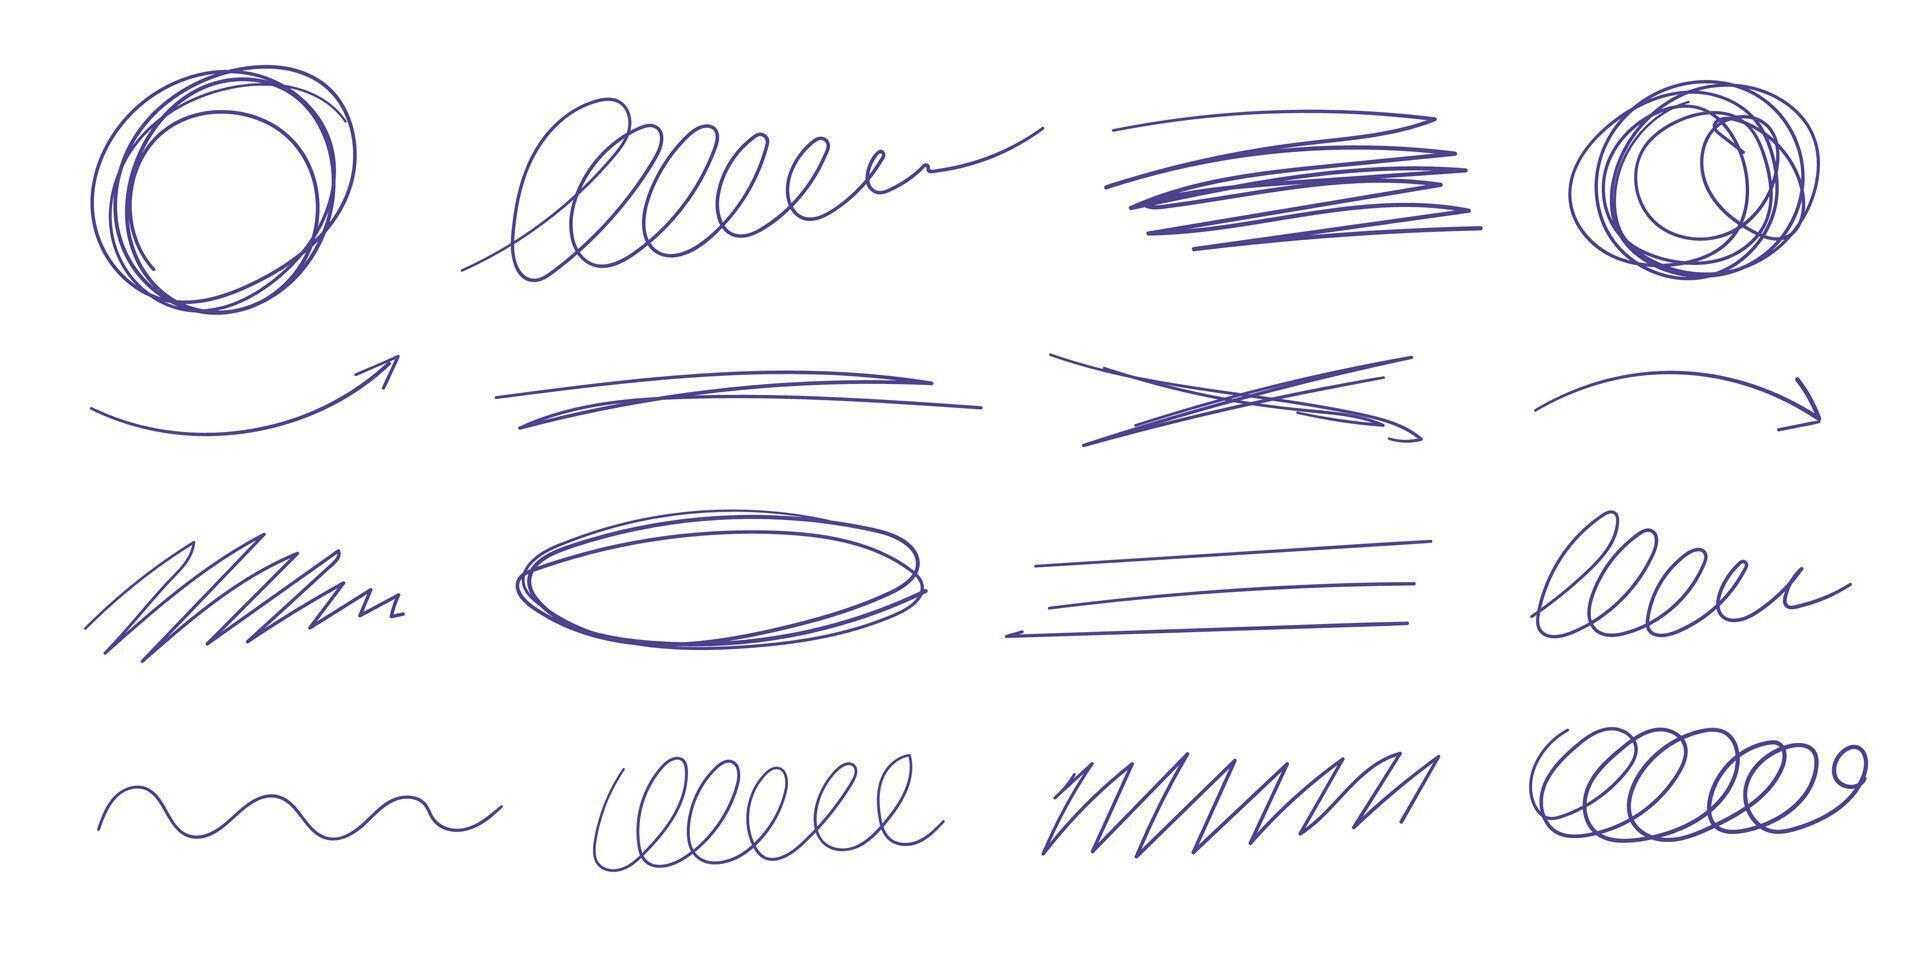 Pen drawn line vector. Hand drawn doodle marker stroke of graffiti texture grunge style. vector